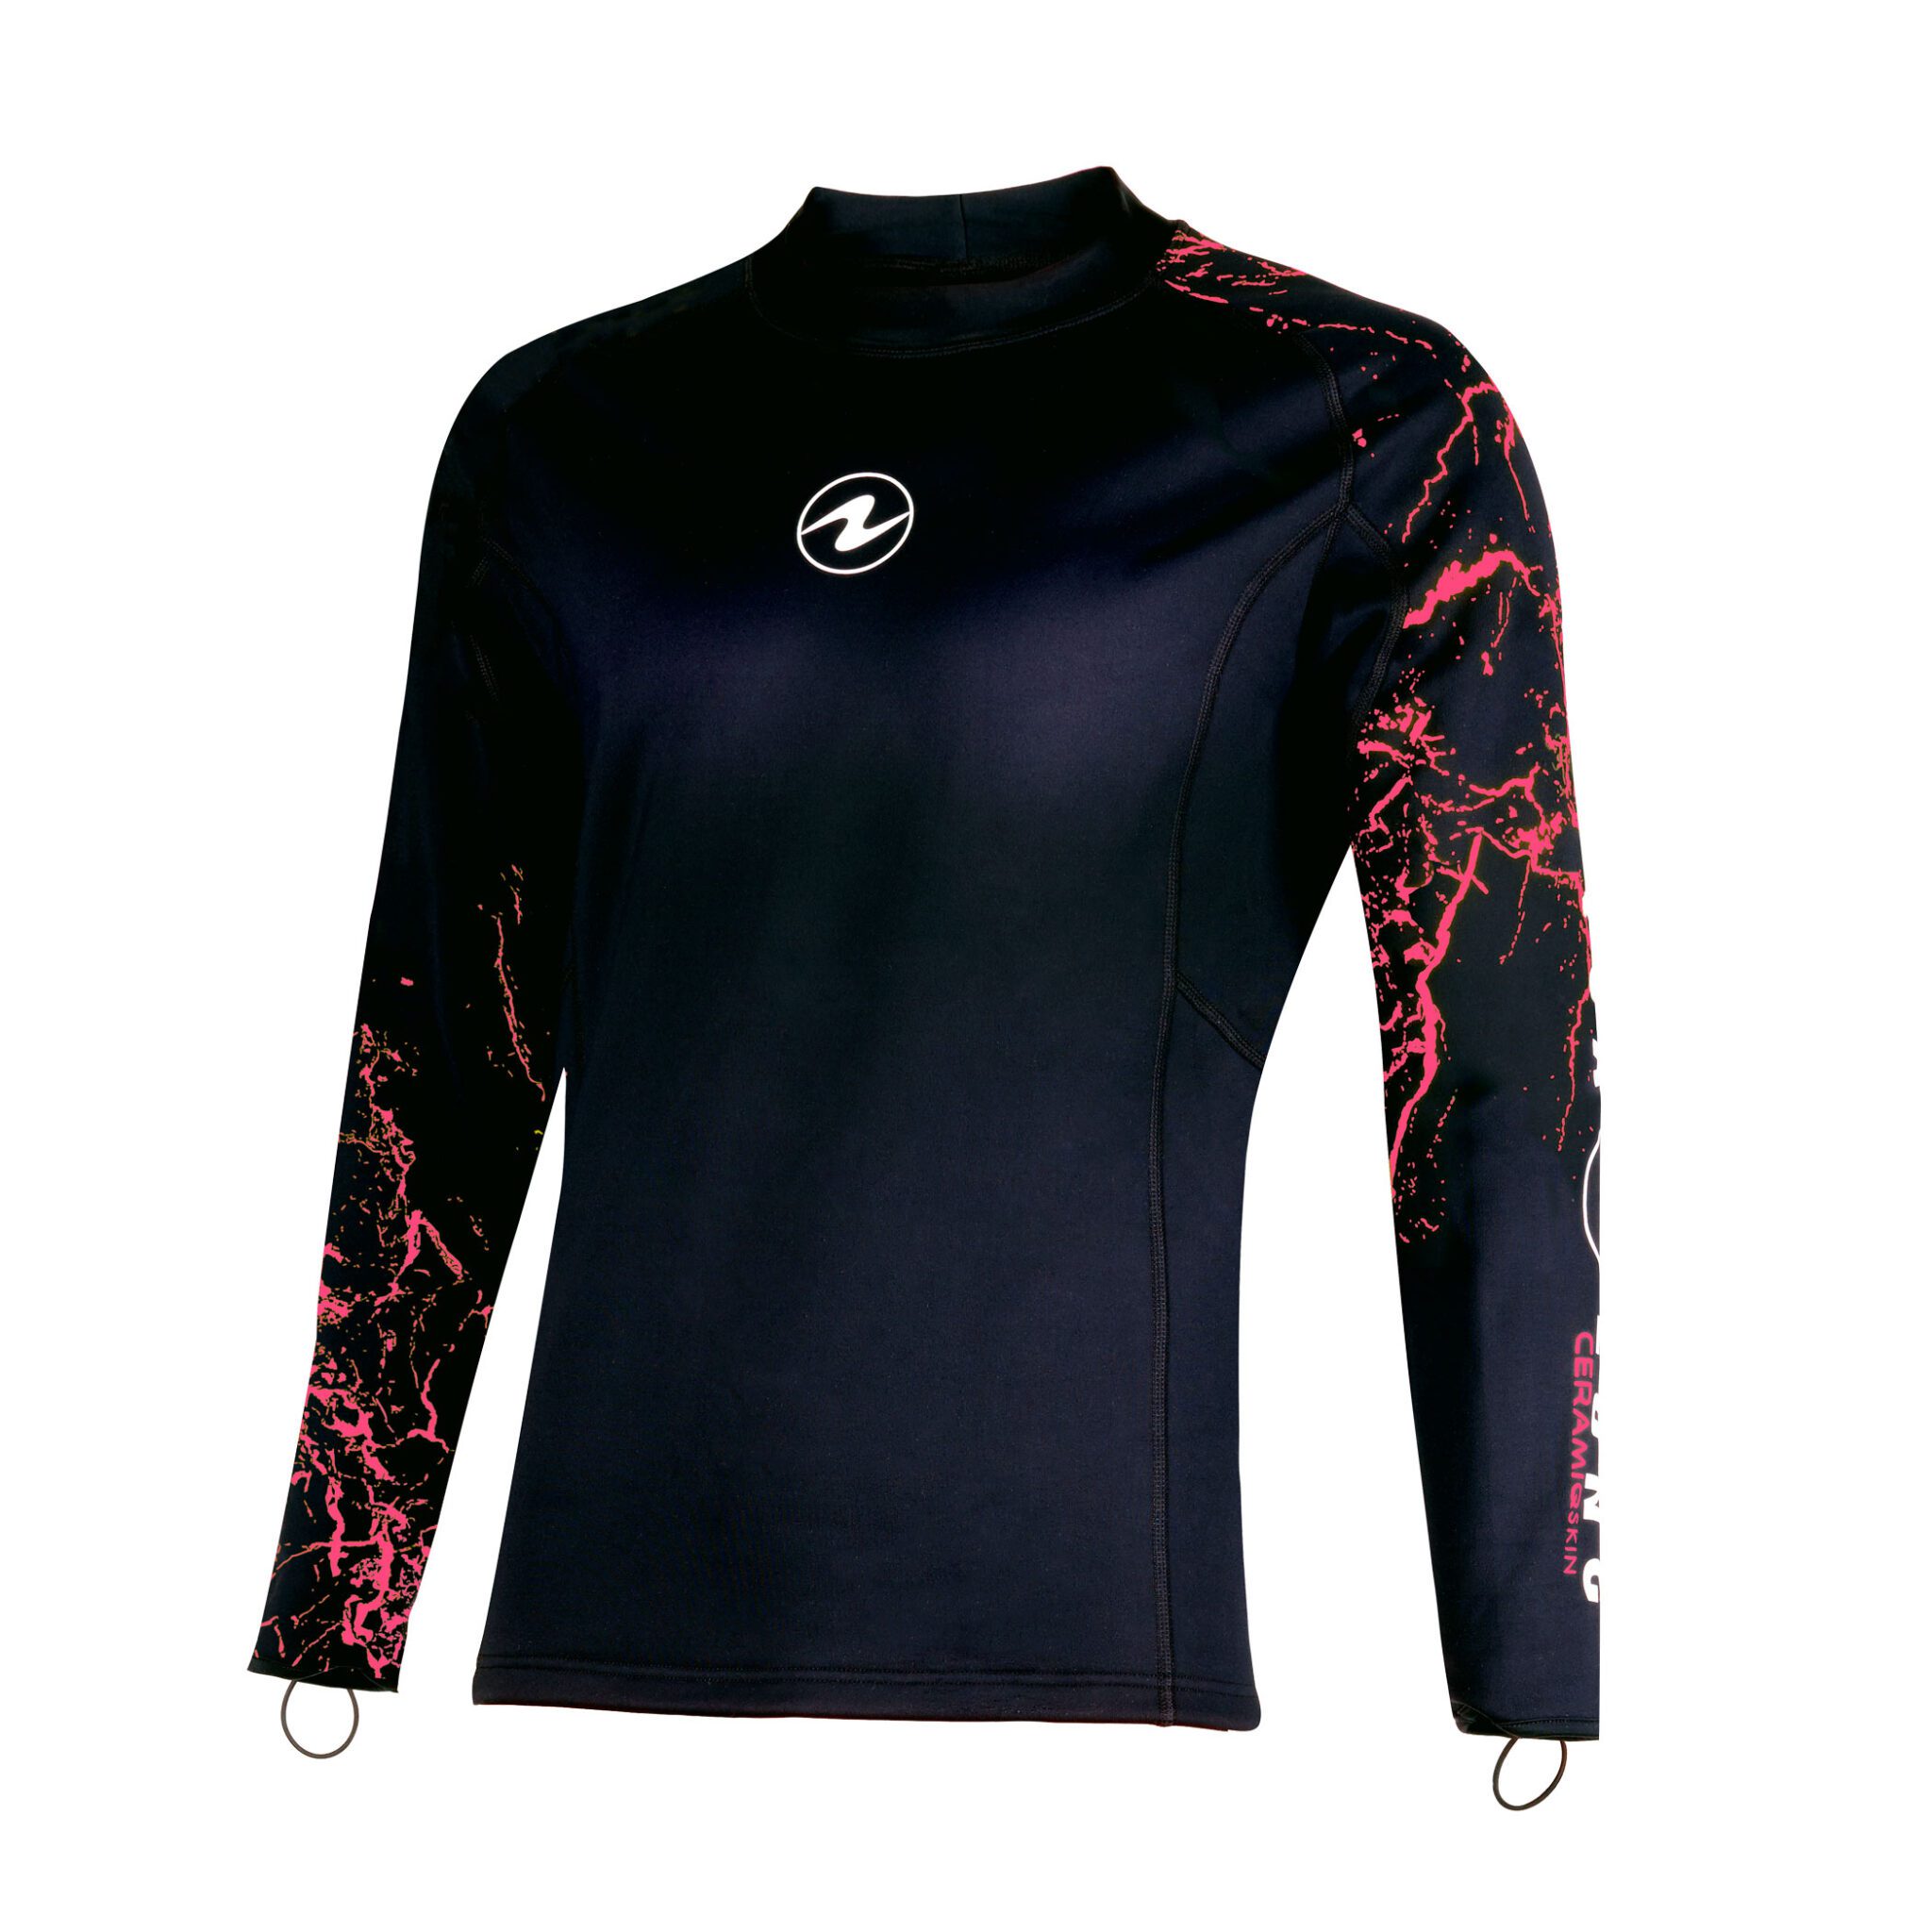 Aqualung Ceramiqskin Women’s Long-Sleeve Infrared Thermal Top